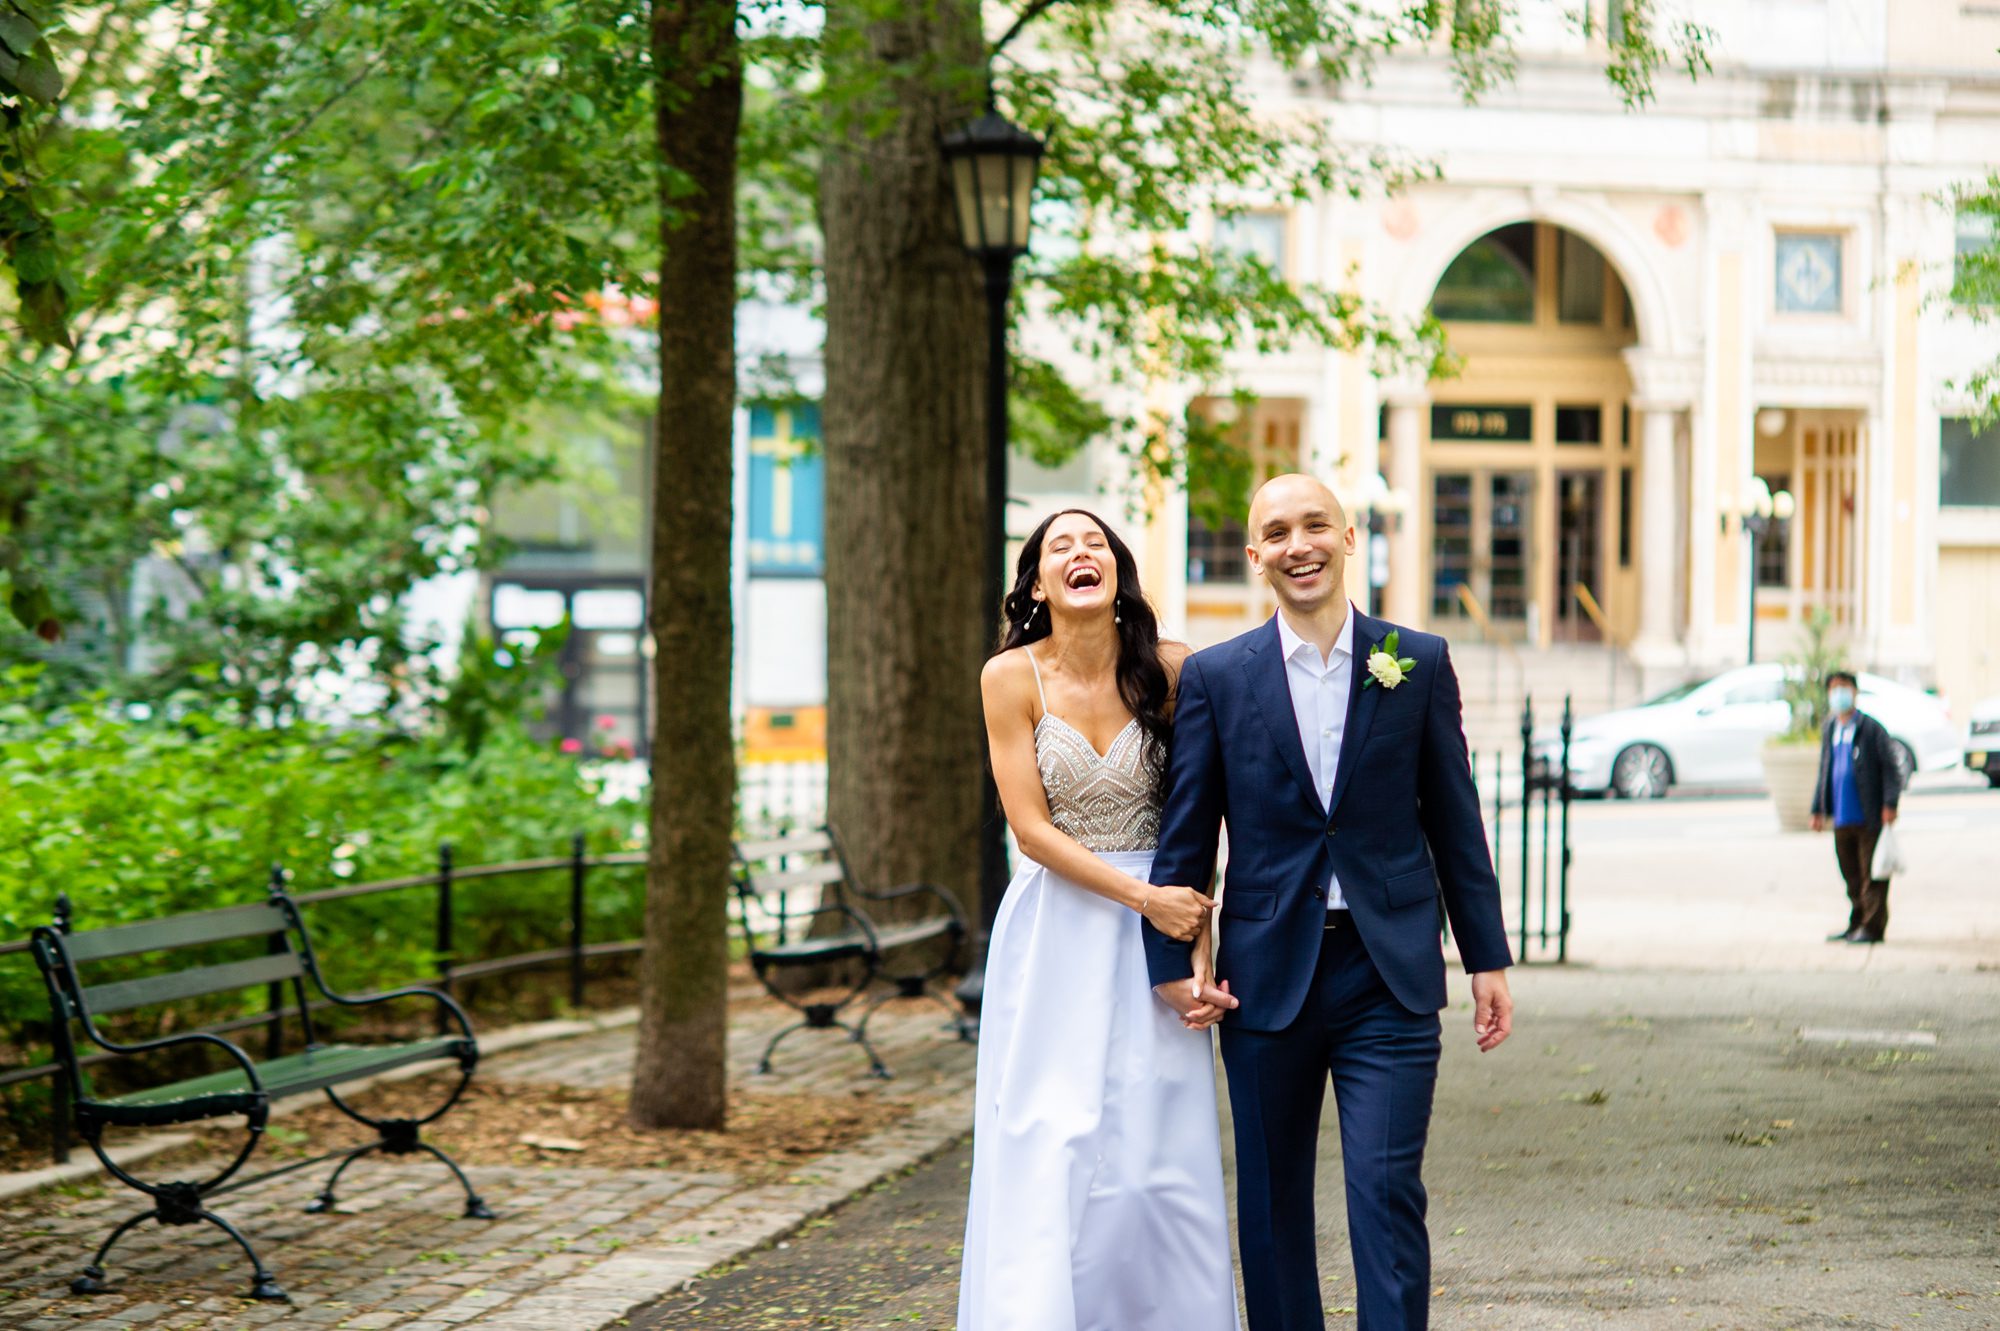 Lower East Side Park for Wedding Photos